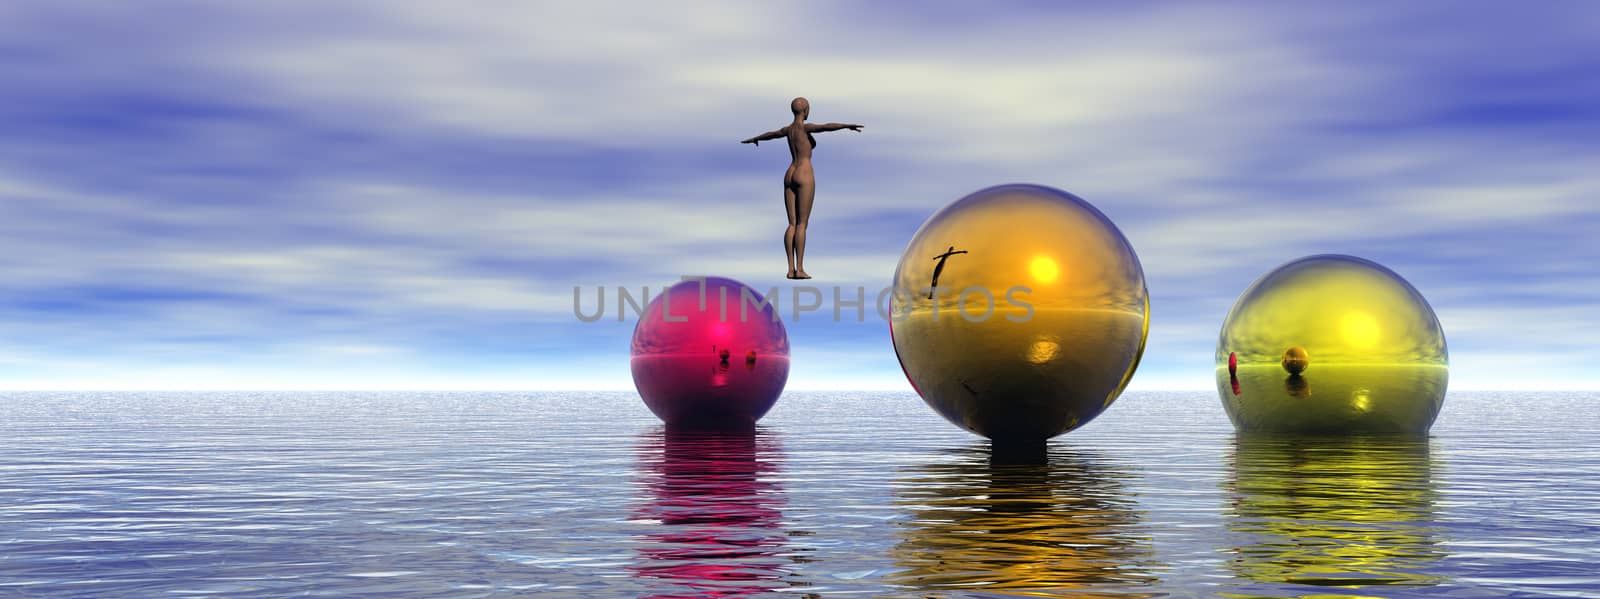 Dancer and colorful spheres hovers above endless ocean